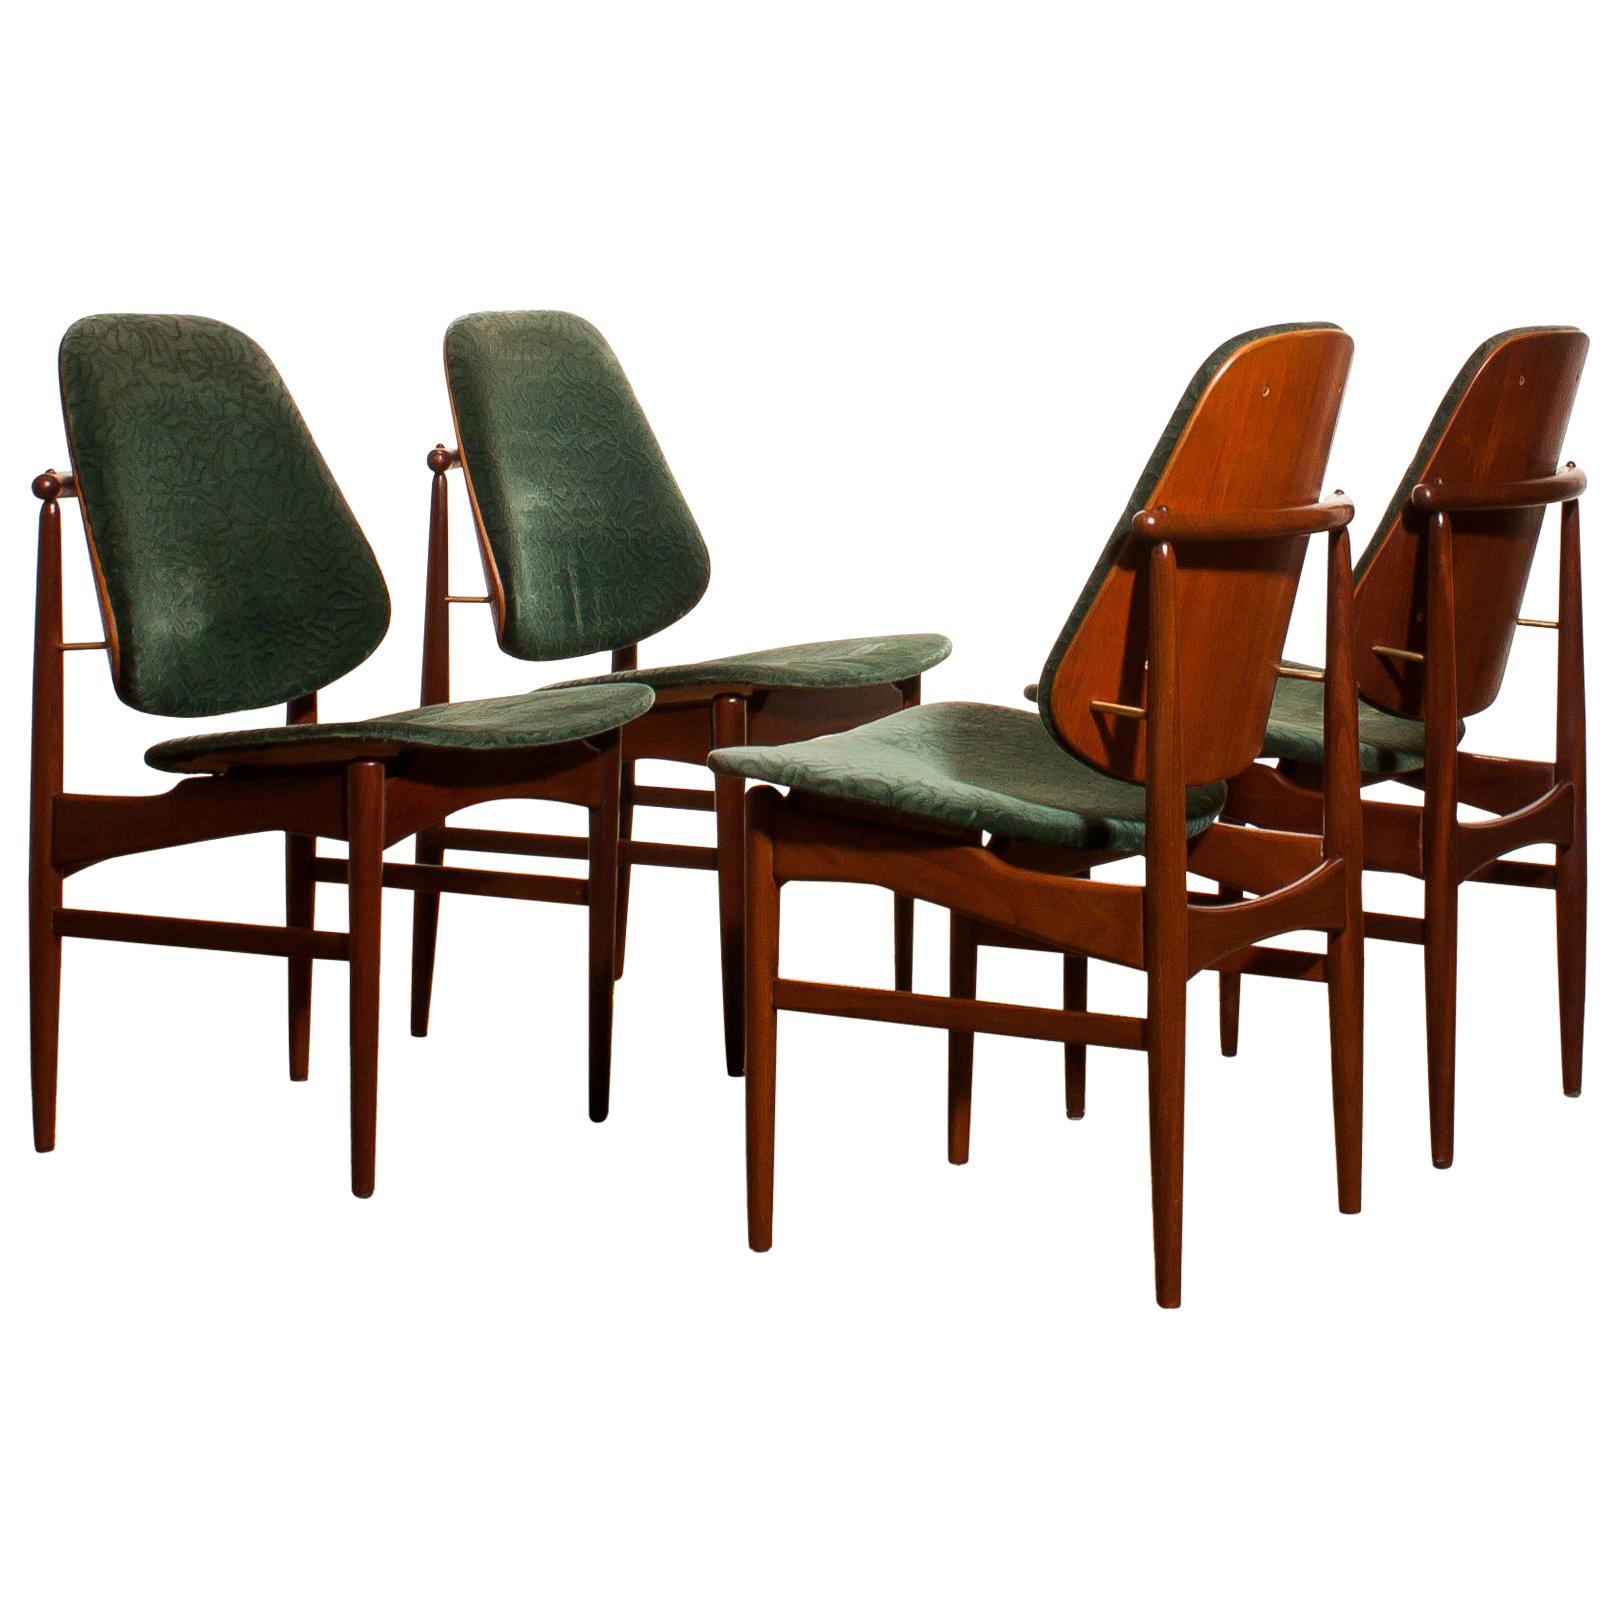 Beautiful set of four Arne Vodder design armchairs made by France & Daverkosen, Denmark.
The ( original ) fabric needs to be replaced!
These chairs sit extremely comfortable and are beautifully finished with beautiful bronze details.
The teak wooden